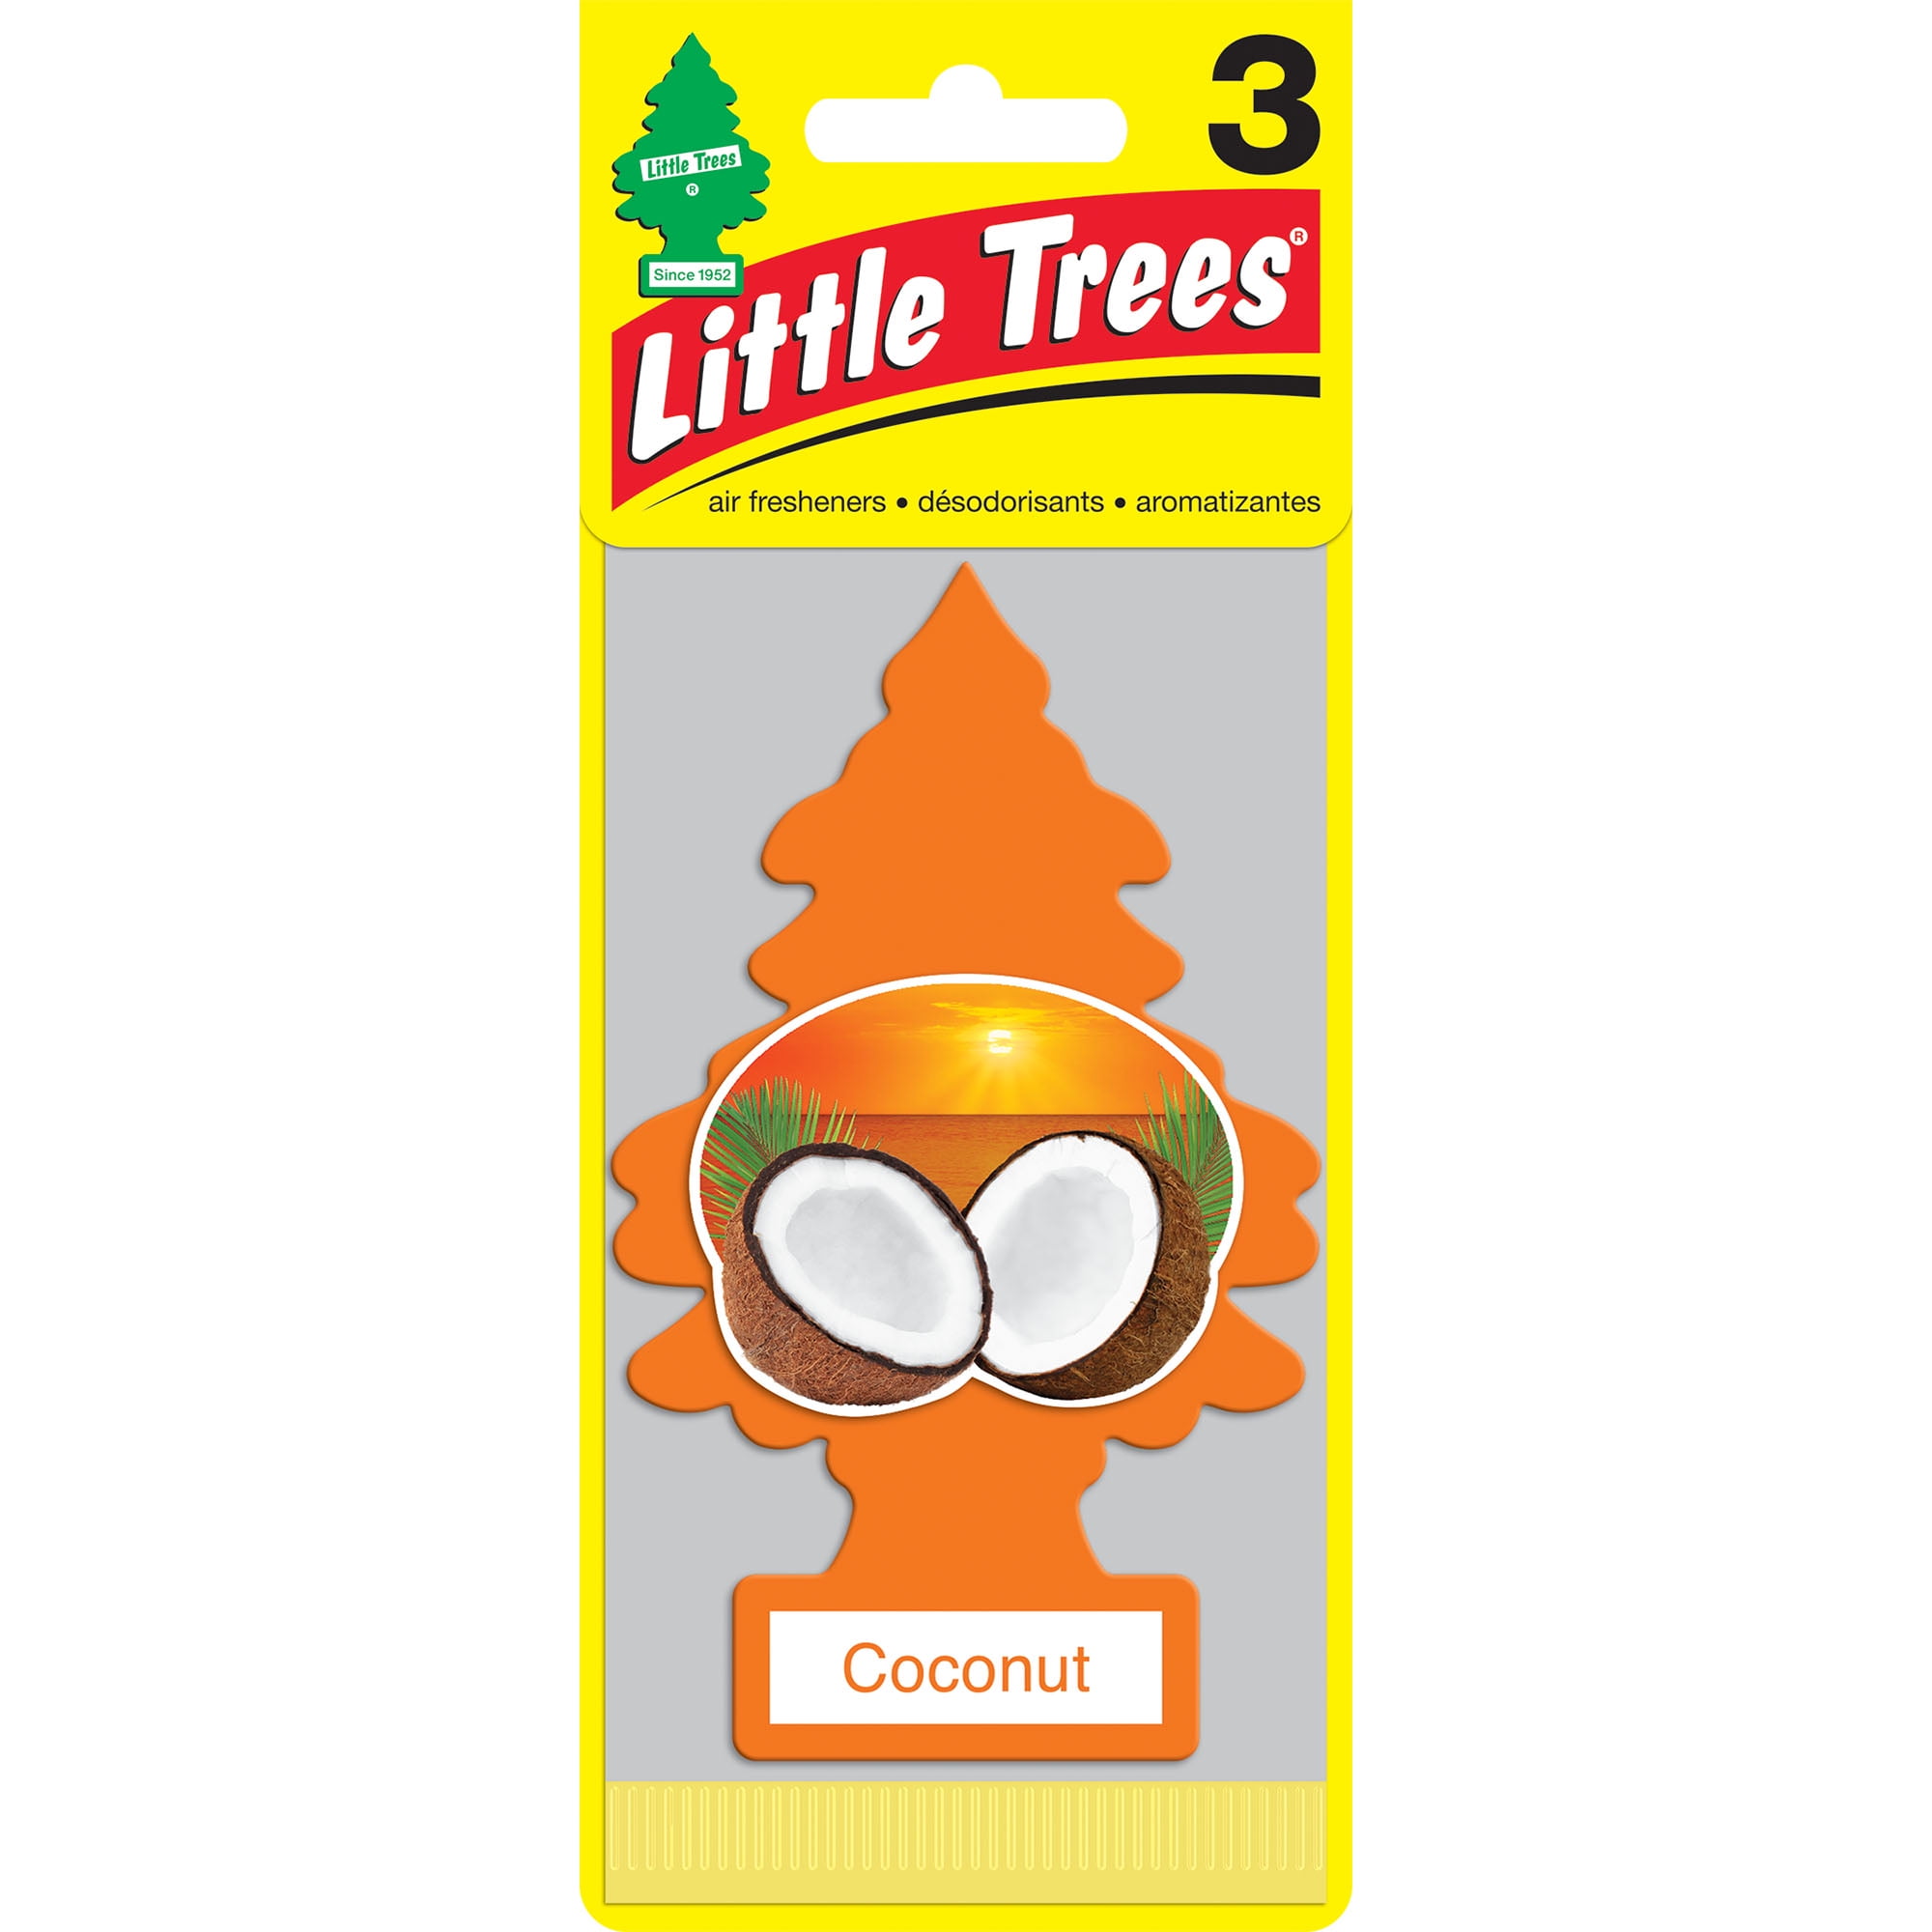 Little Trees Air Fresheners Coconut Fragrance 3 Pack